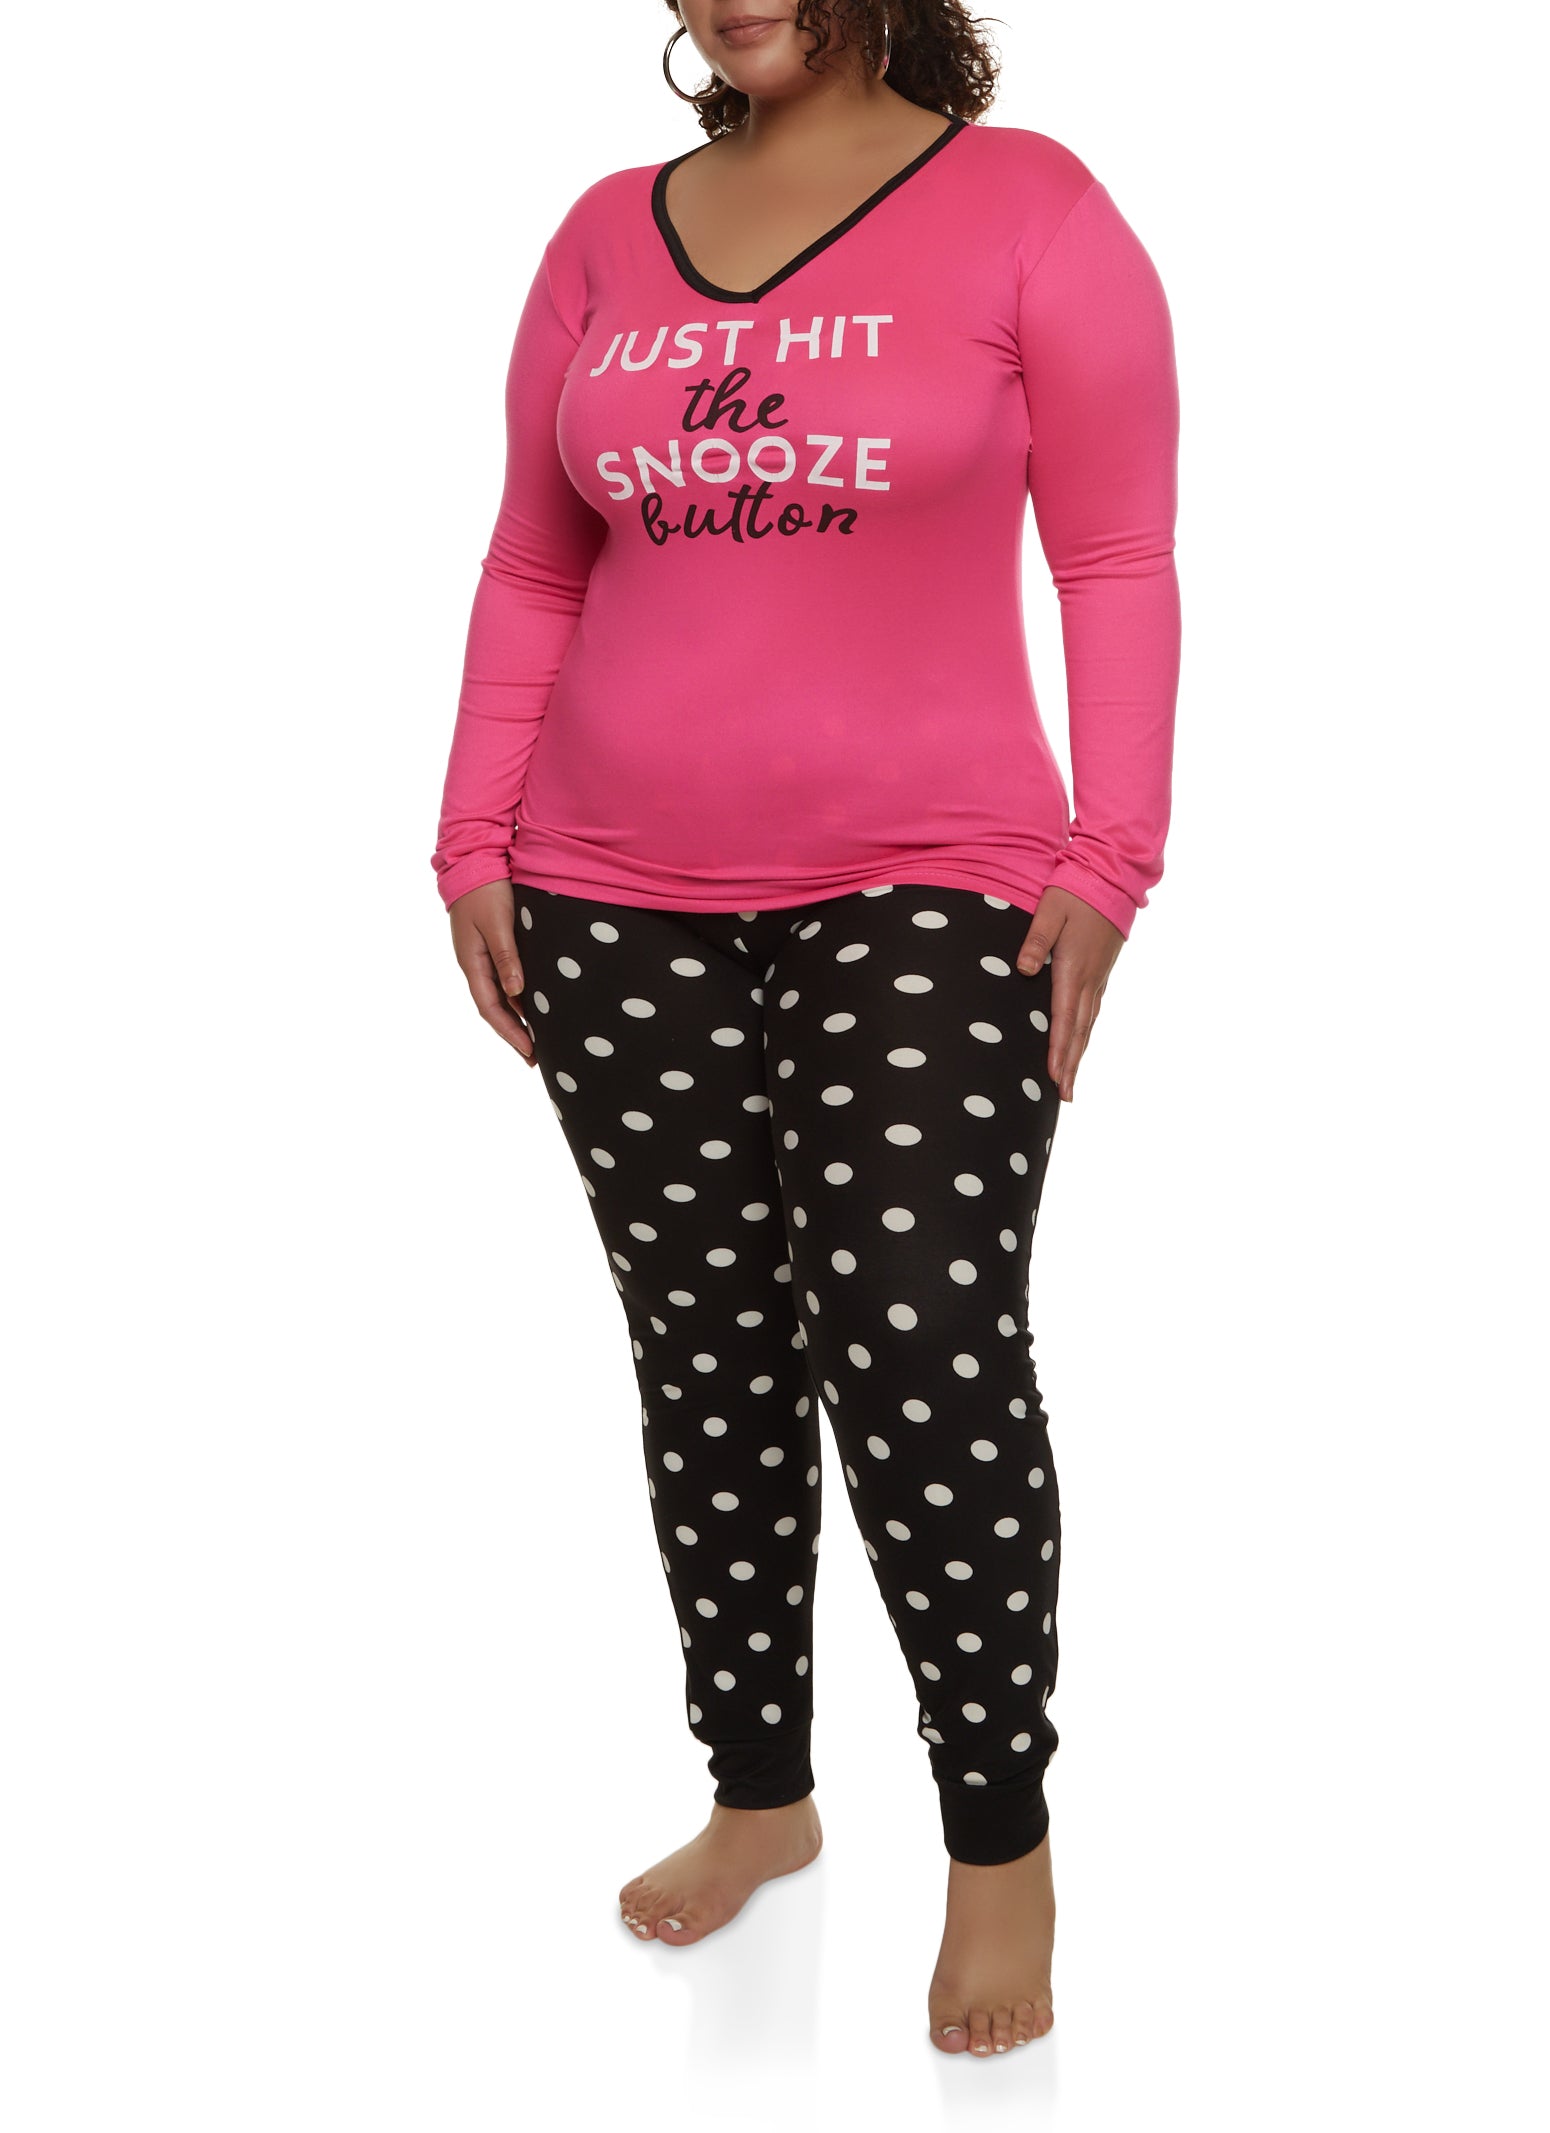 Rainbow Shops Womens Plus Size Just Hit The Snooze Button Pajama Top and  Polka Dot Pants, Pink, Size 3X